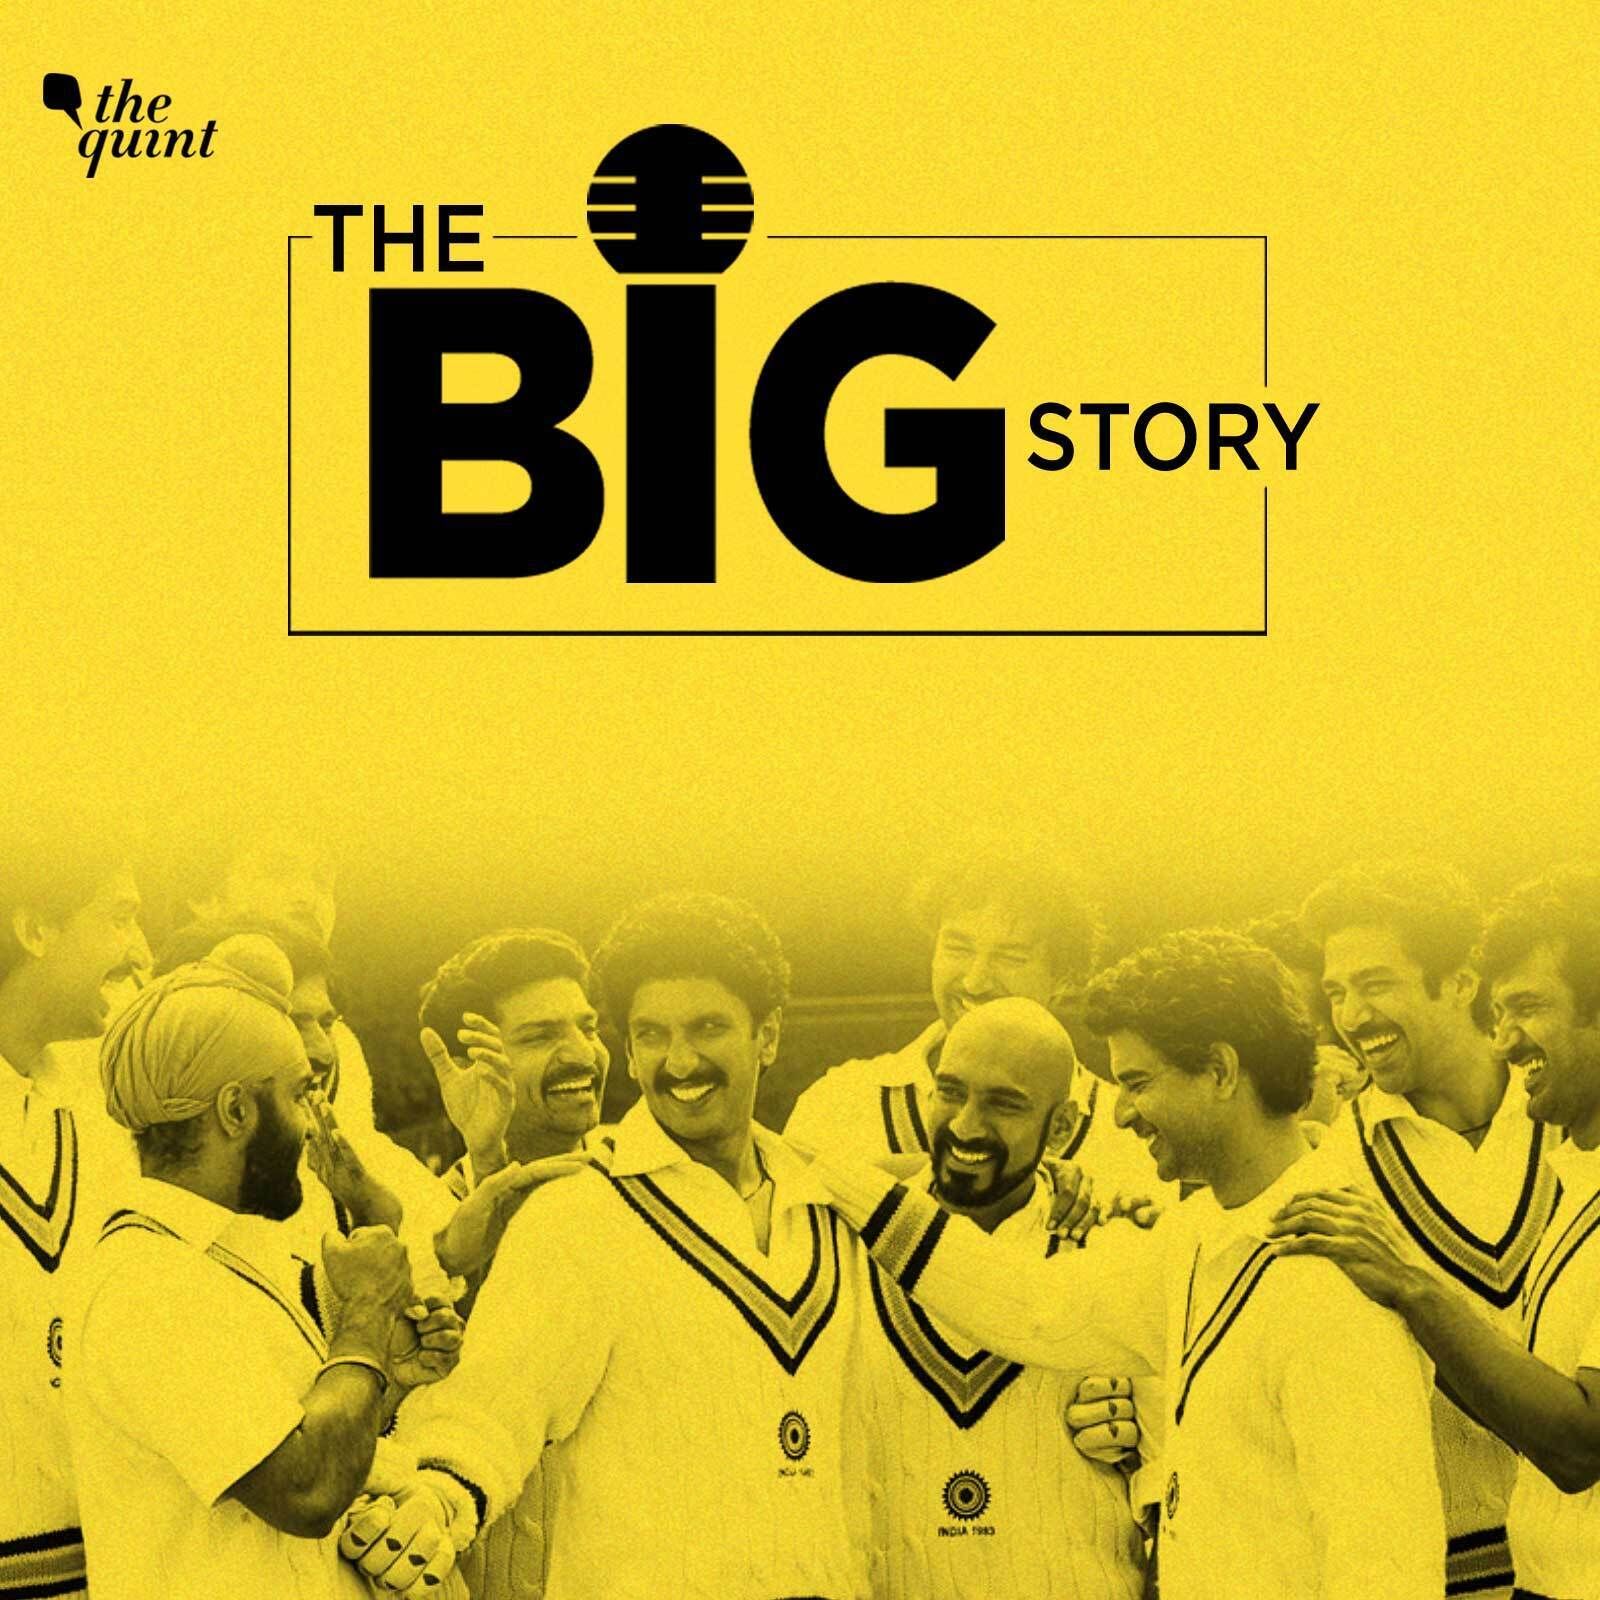 852: Why The World Cup of 1983 Changed The Face of Indian Cricket